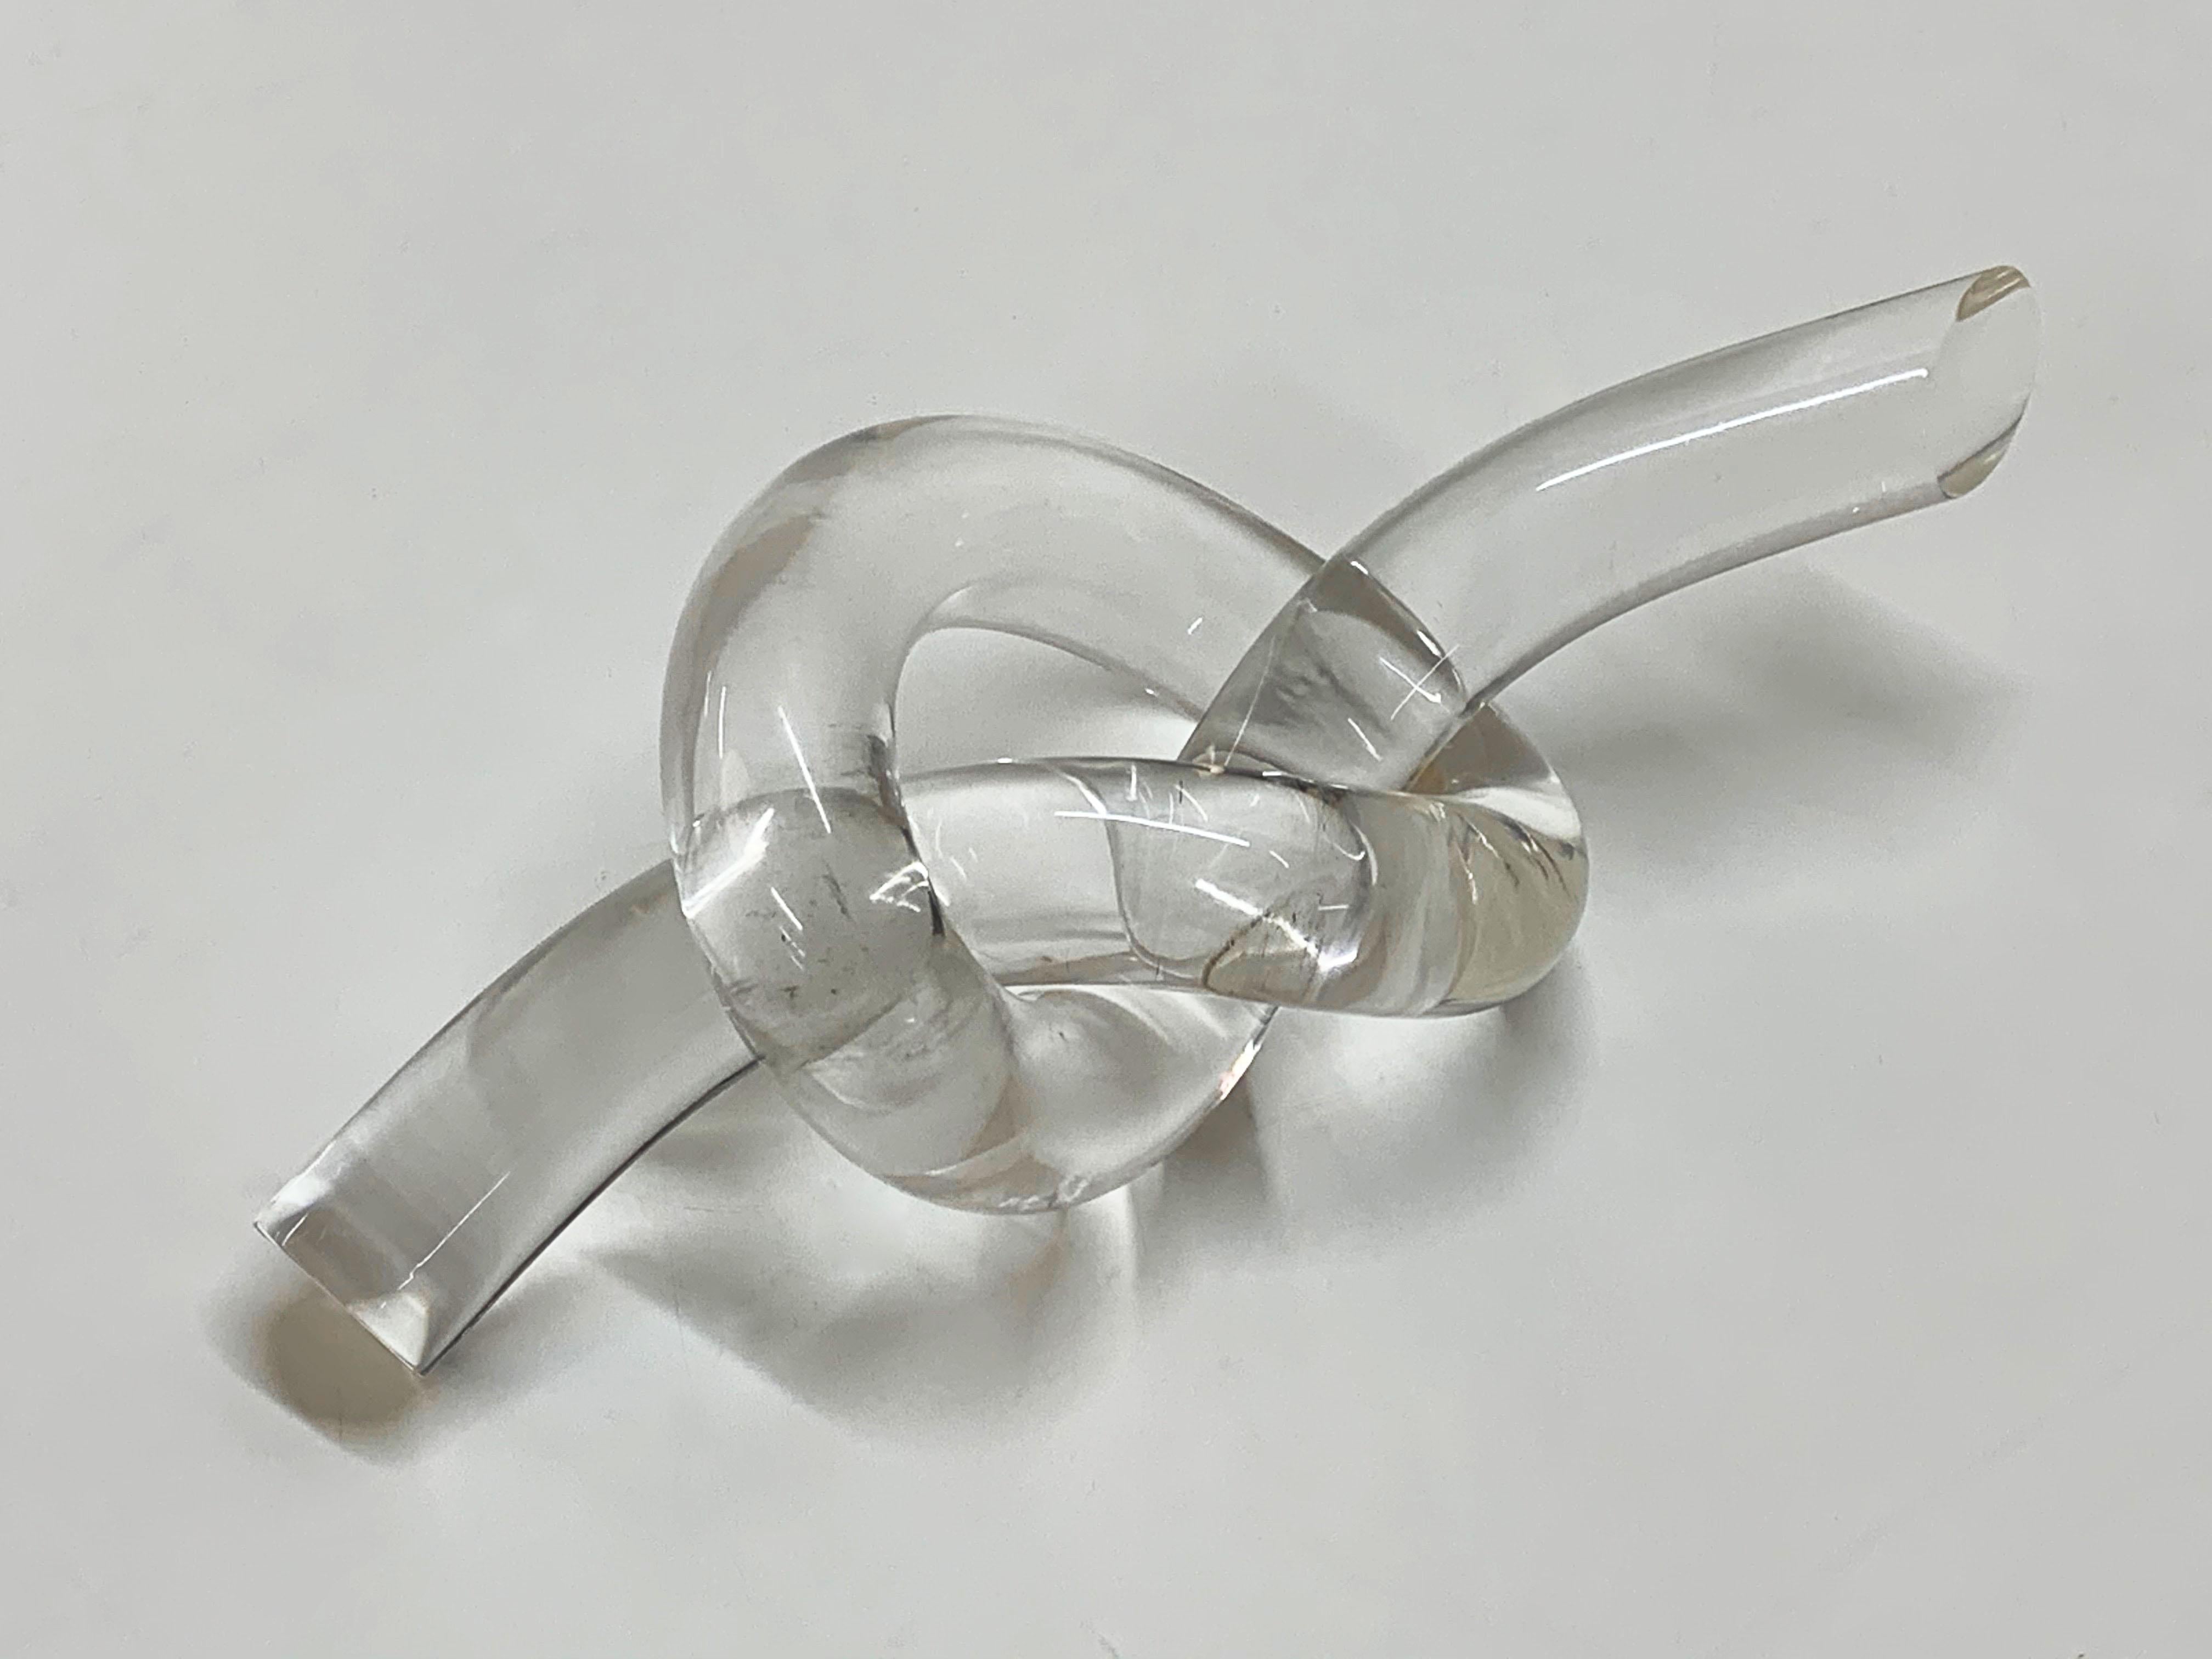 Central American Dorothy Thorpe Midcentury Crystal Lucite American Knot Paperweight Sculpture For Sale